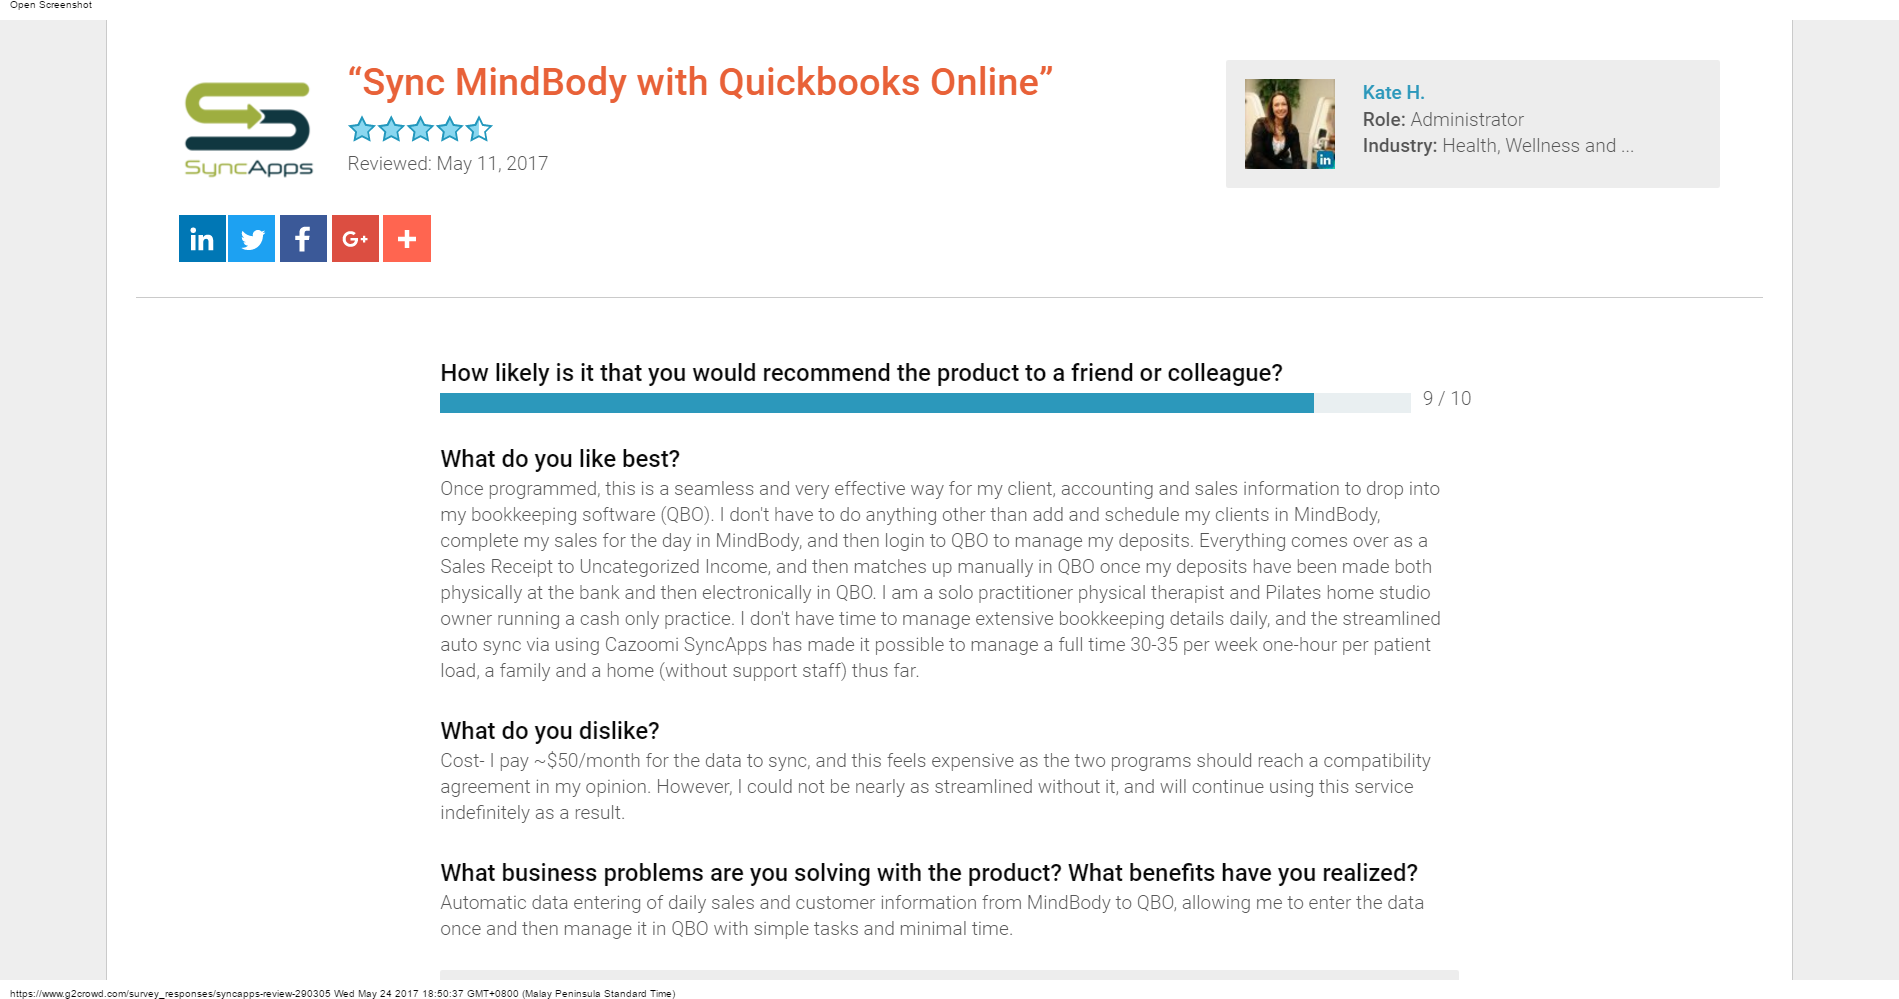 SyncApps Review Sync MindBody with Quickbooks Online